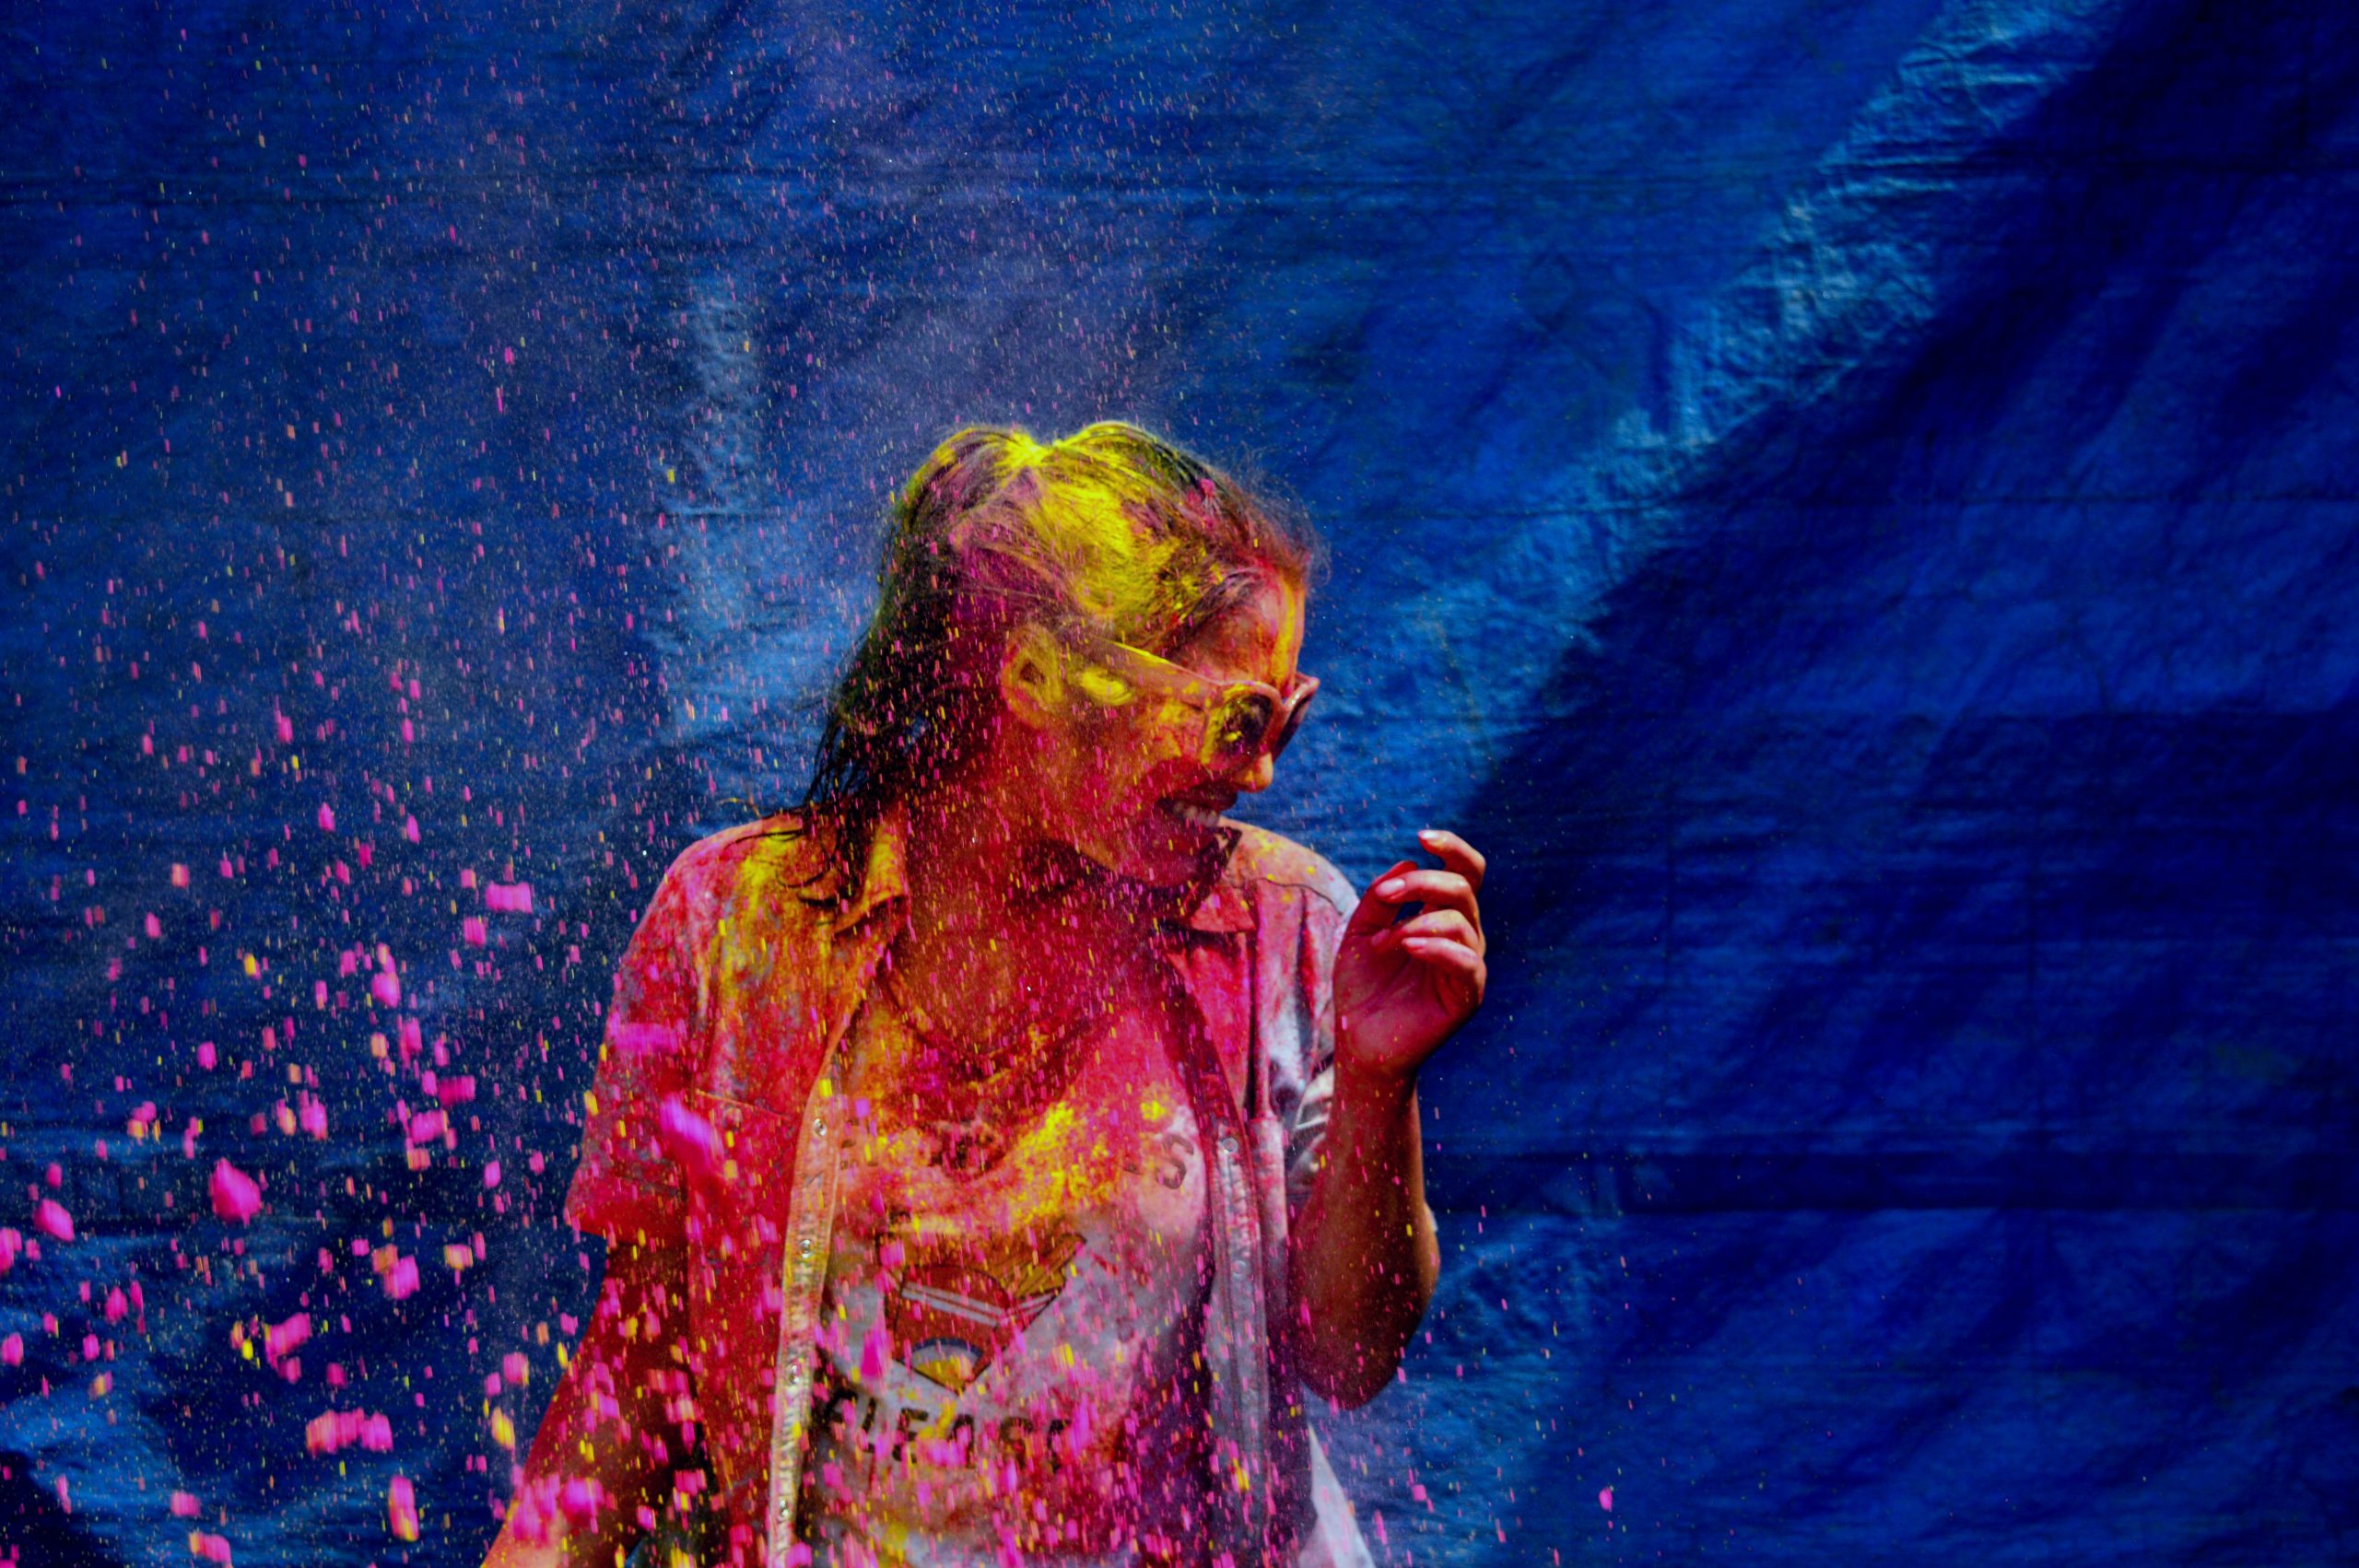 How To Get Holi Powder Out of Your Hair